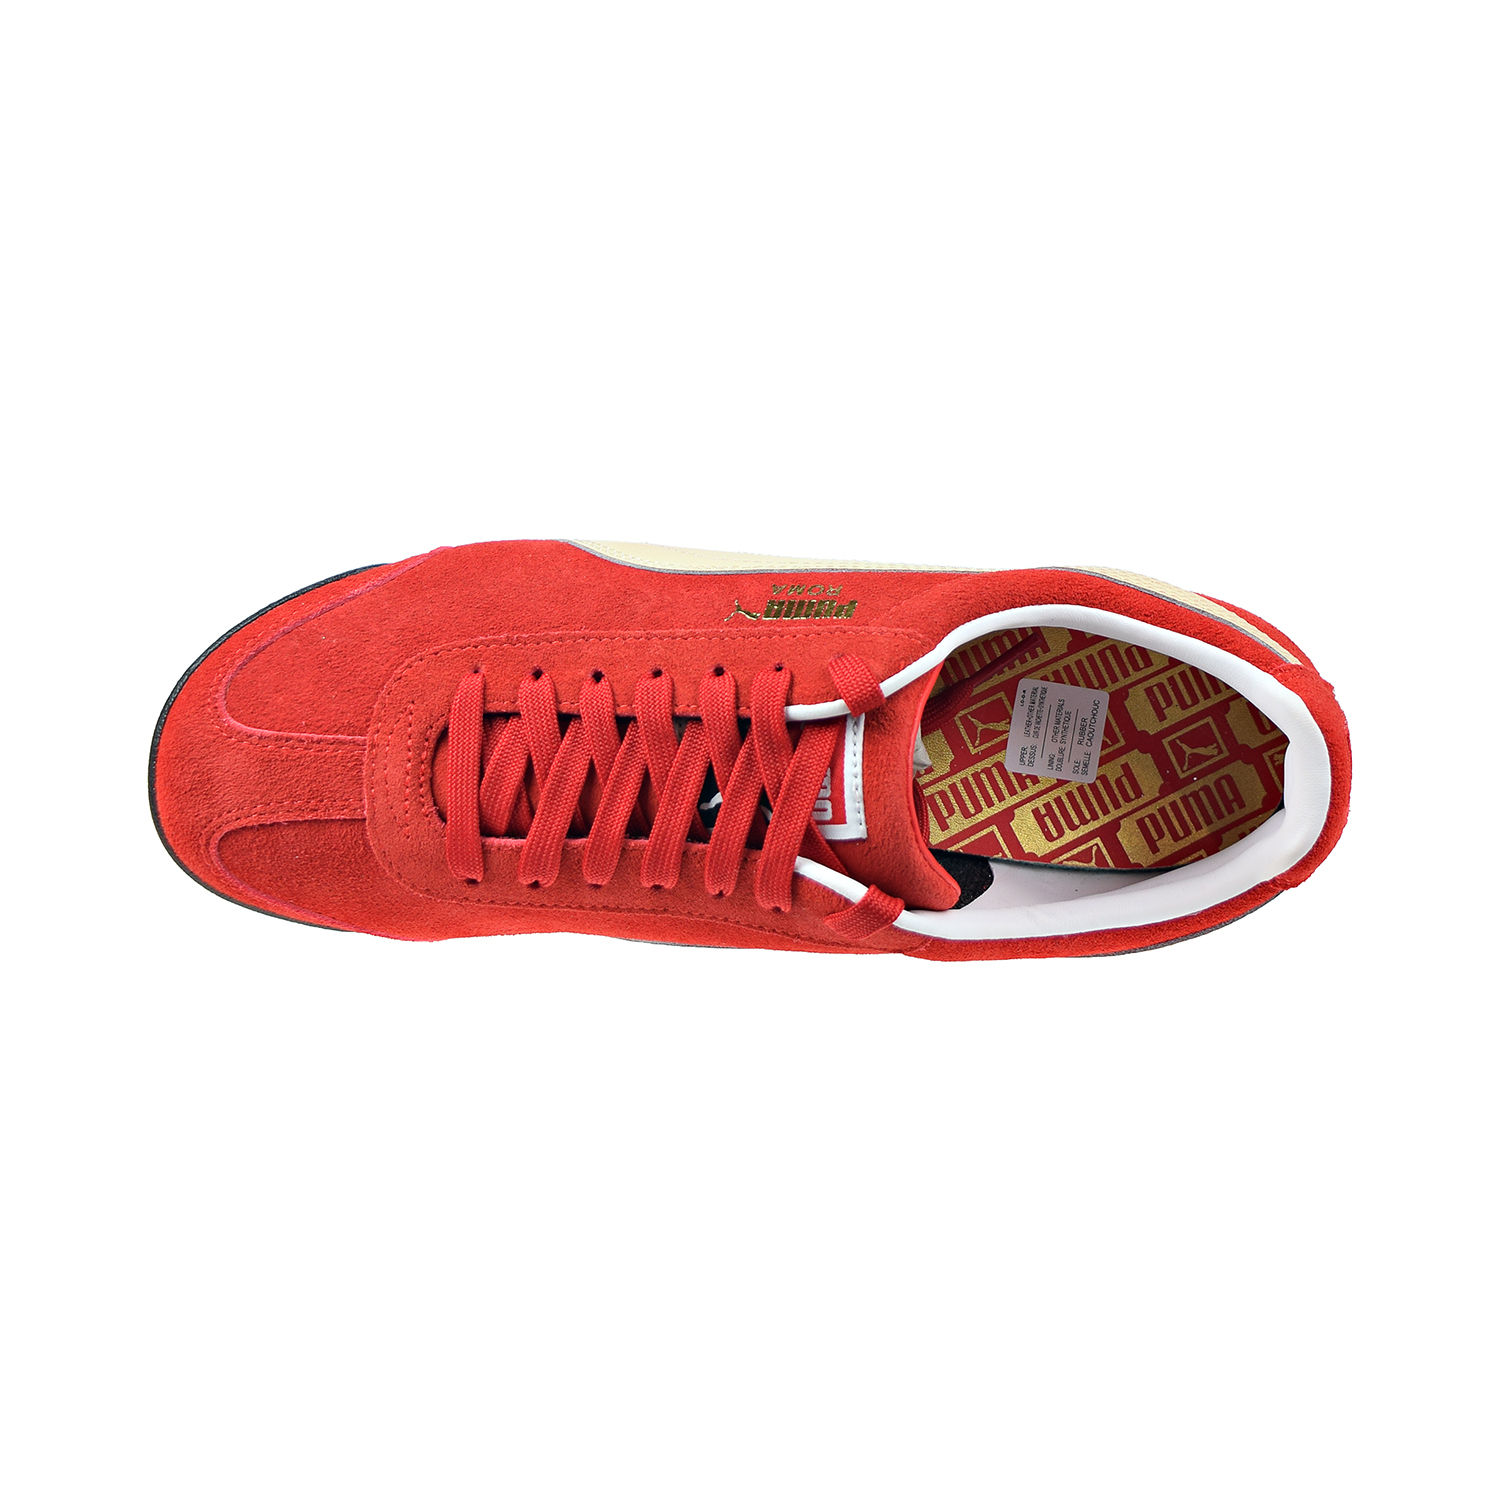 Puma Roma Suede Men's Shoes High Risk Red/Summer Melon 365437-13 - image 5 of 6